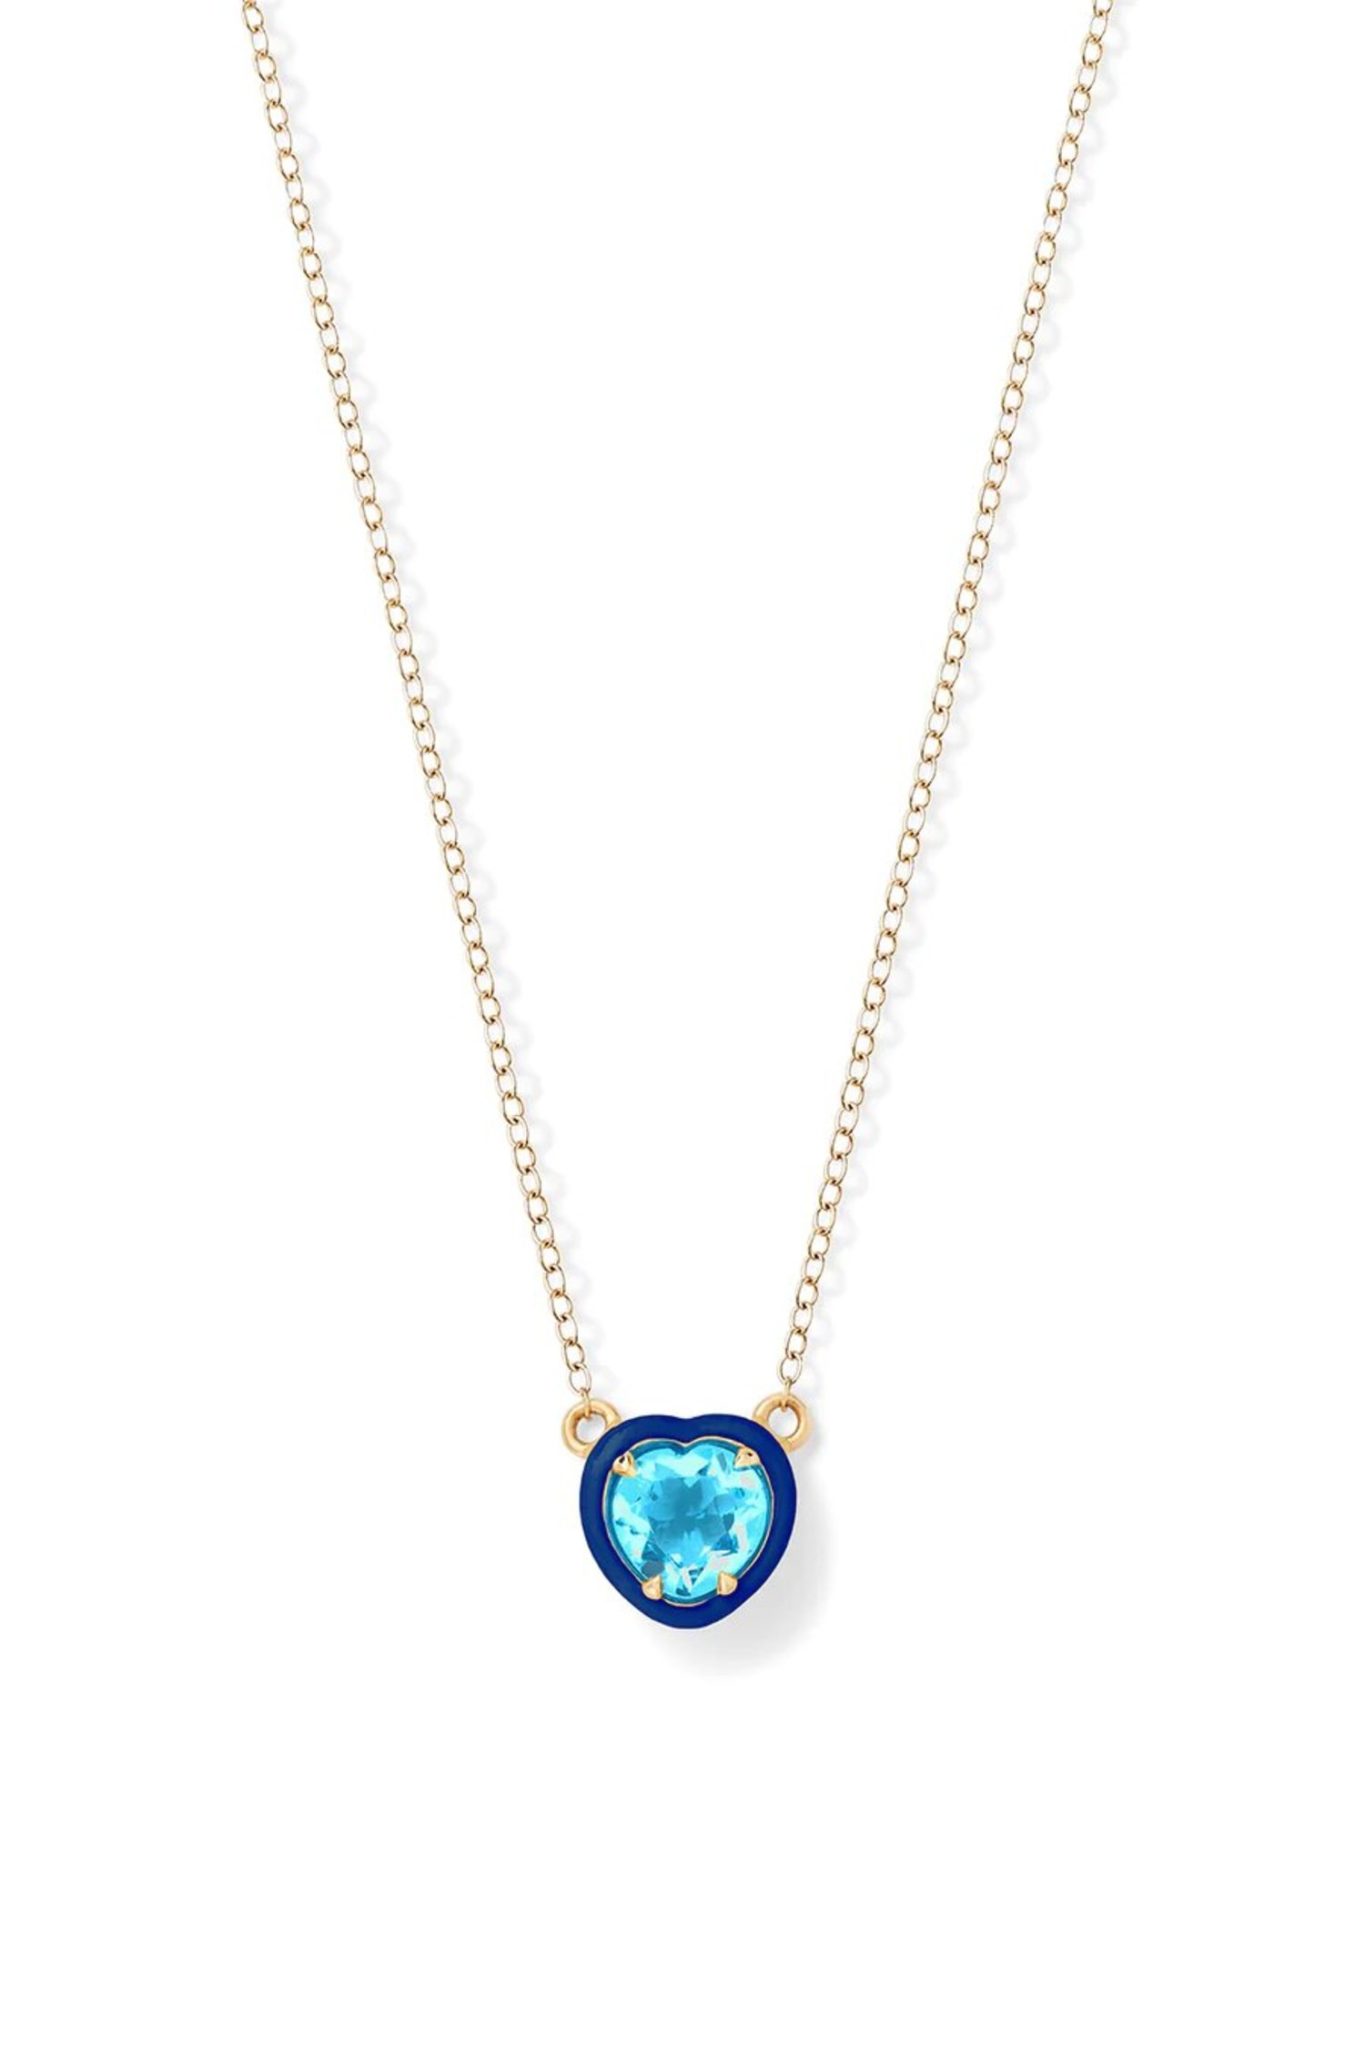 Blue Topaz Heart Cocktail Necklace in 14K Yellow Gold - M. Flynn